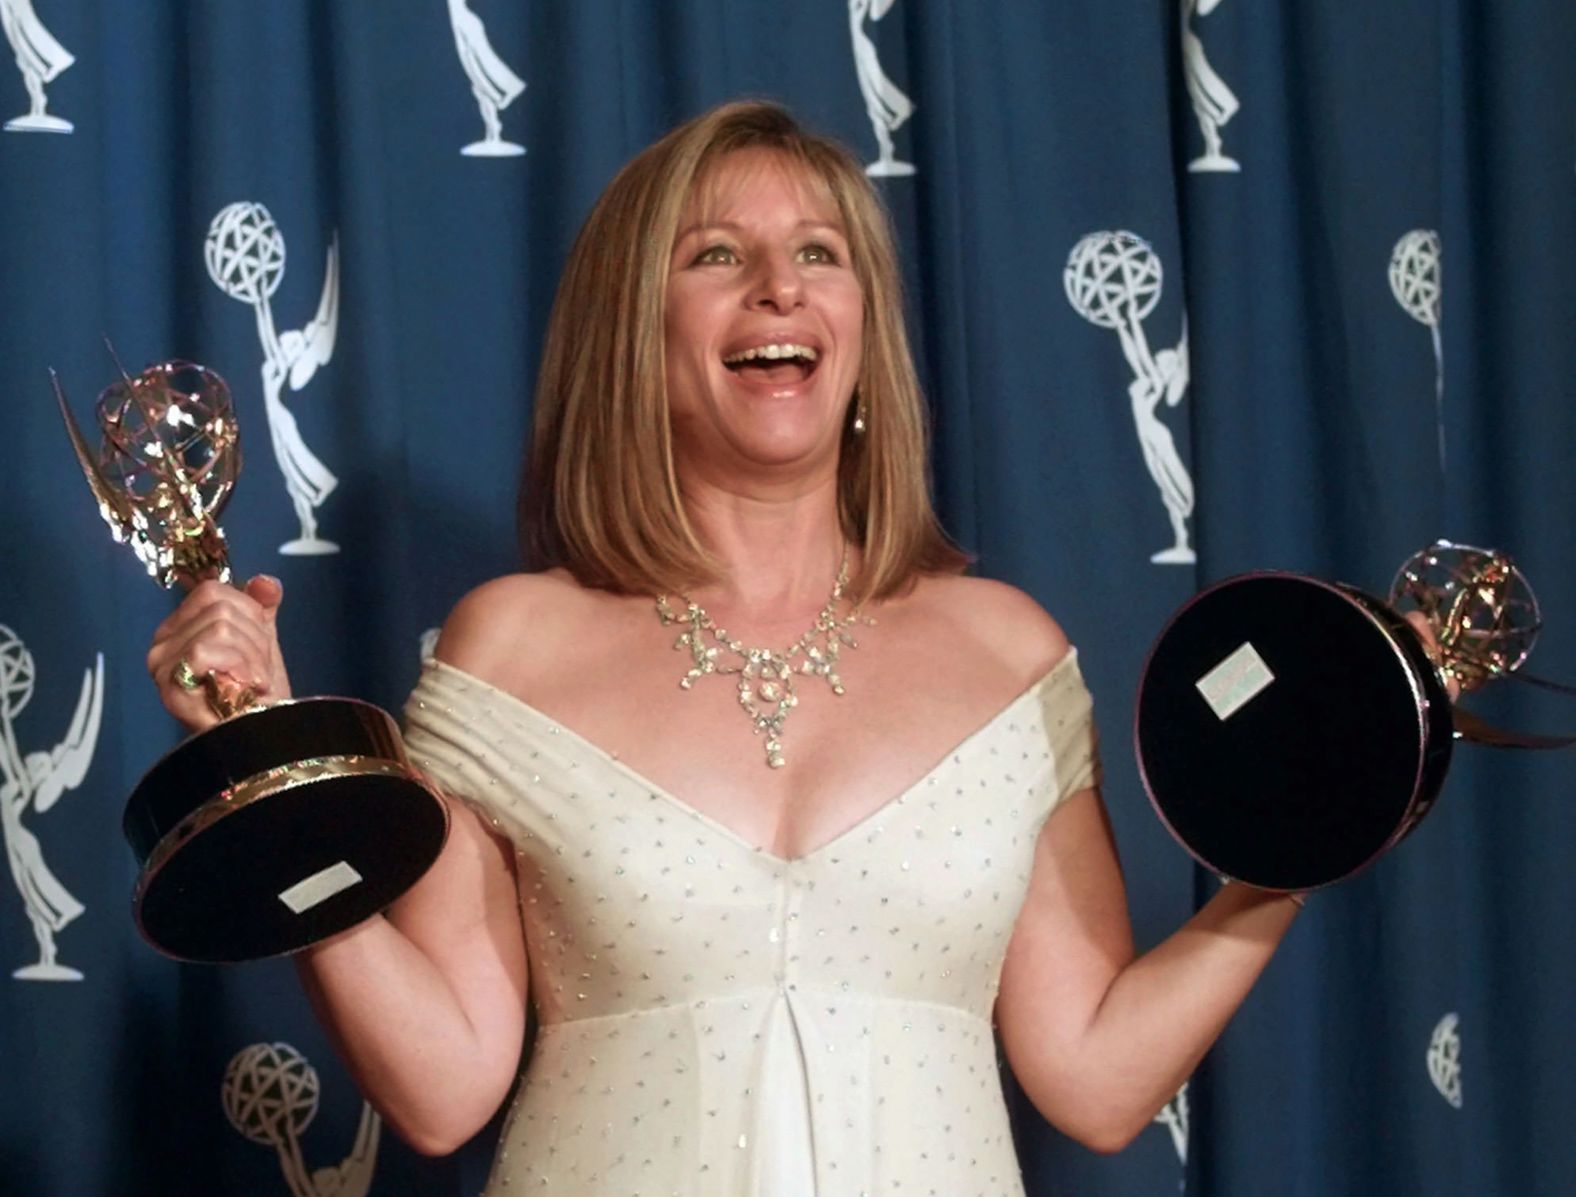 Streisand holds two Emmys for her work on "Barbra Streisand: The Concert" in 1995. The special garnered 10 Emmy nominations and five wins.